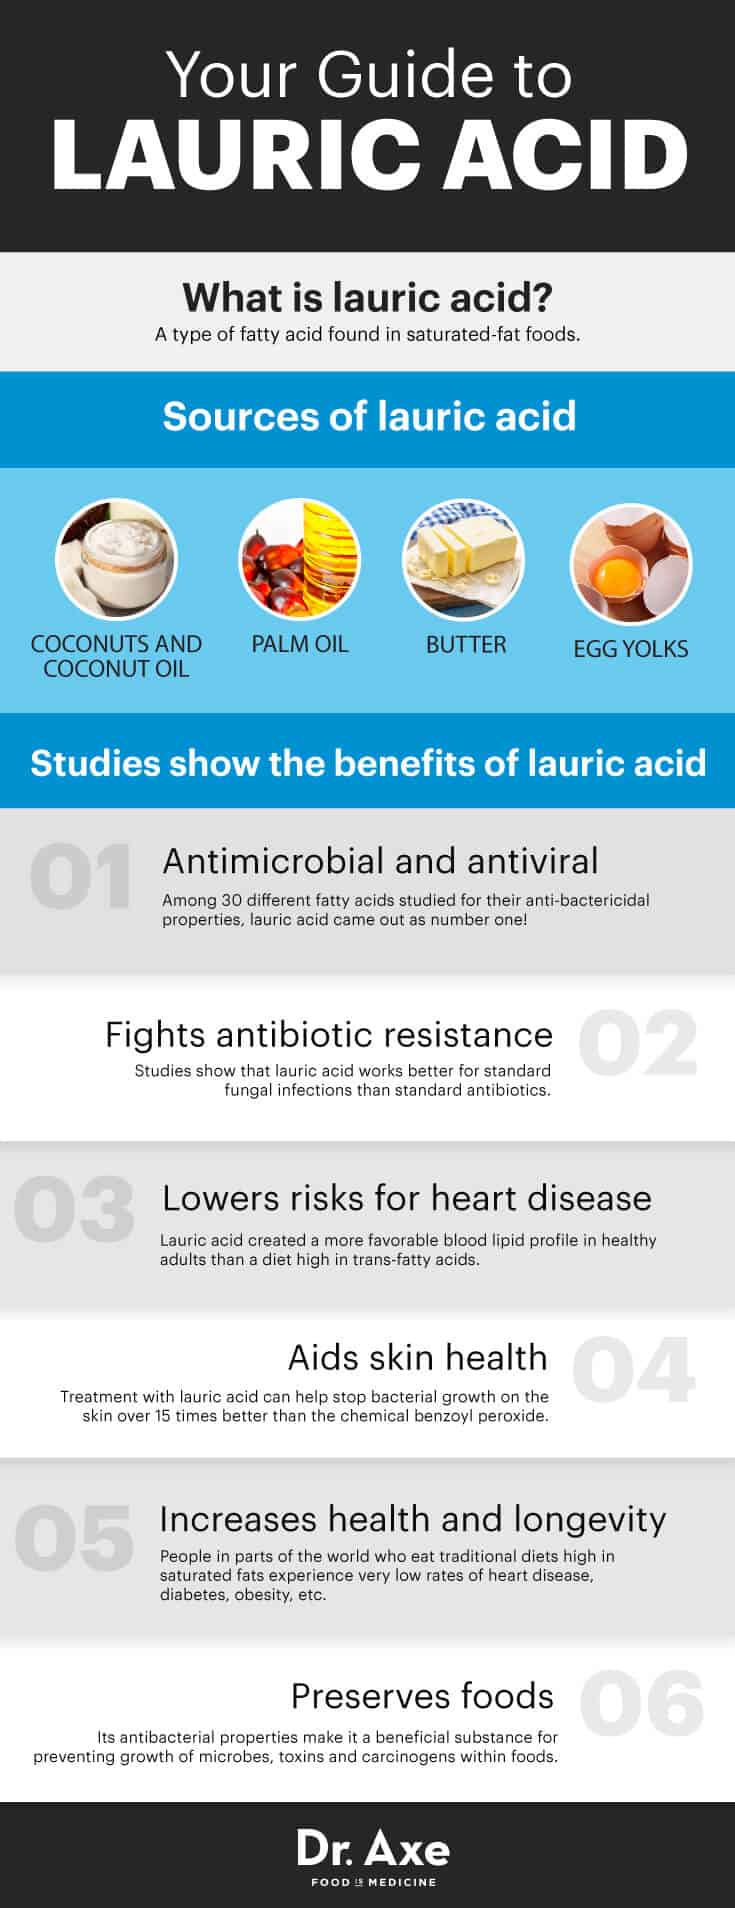 Lauric acid guide - Dr. Axe